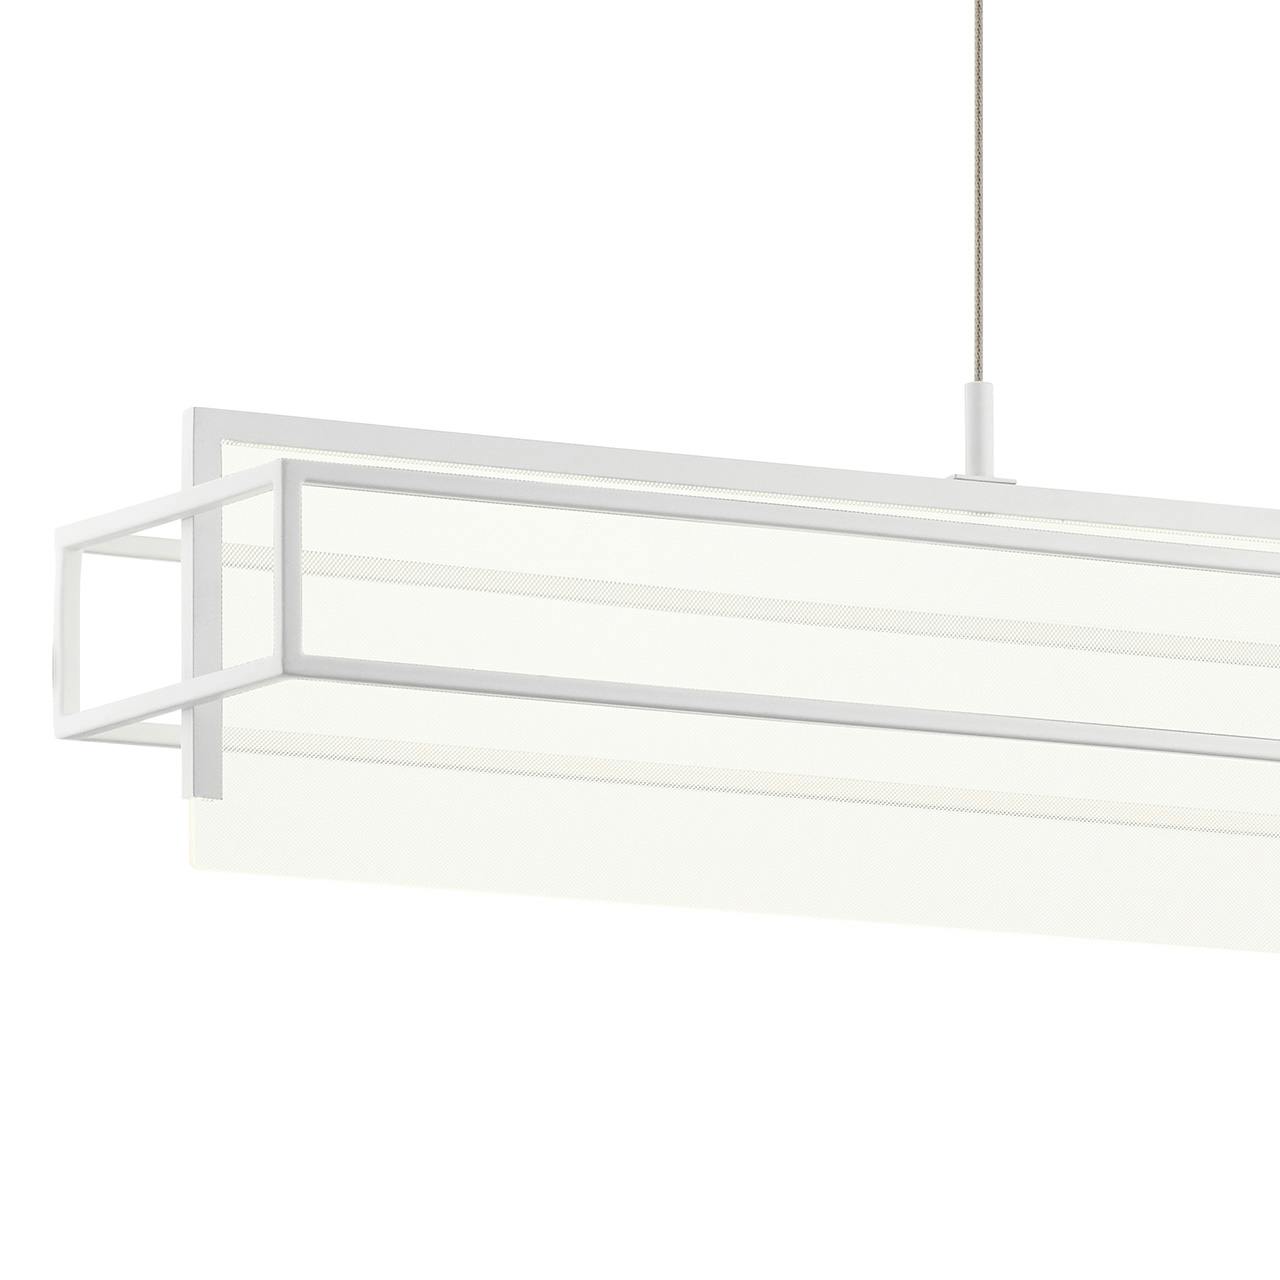 Close up view of the Vega 3000K 38" Linear Chandelier White on a white background